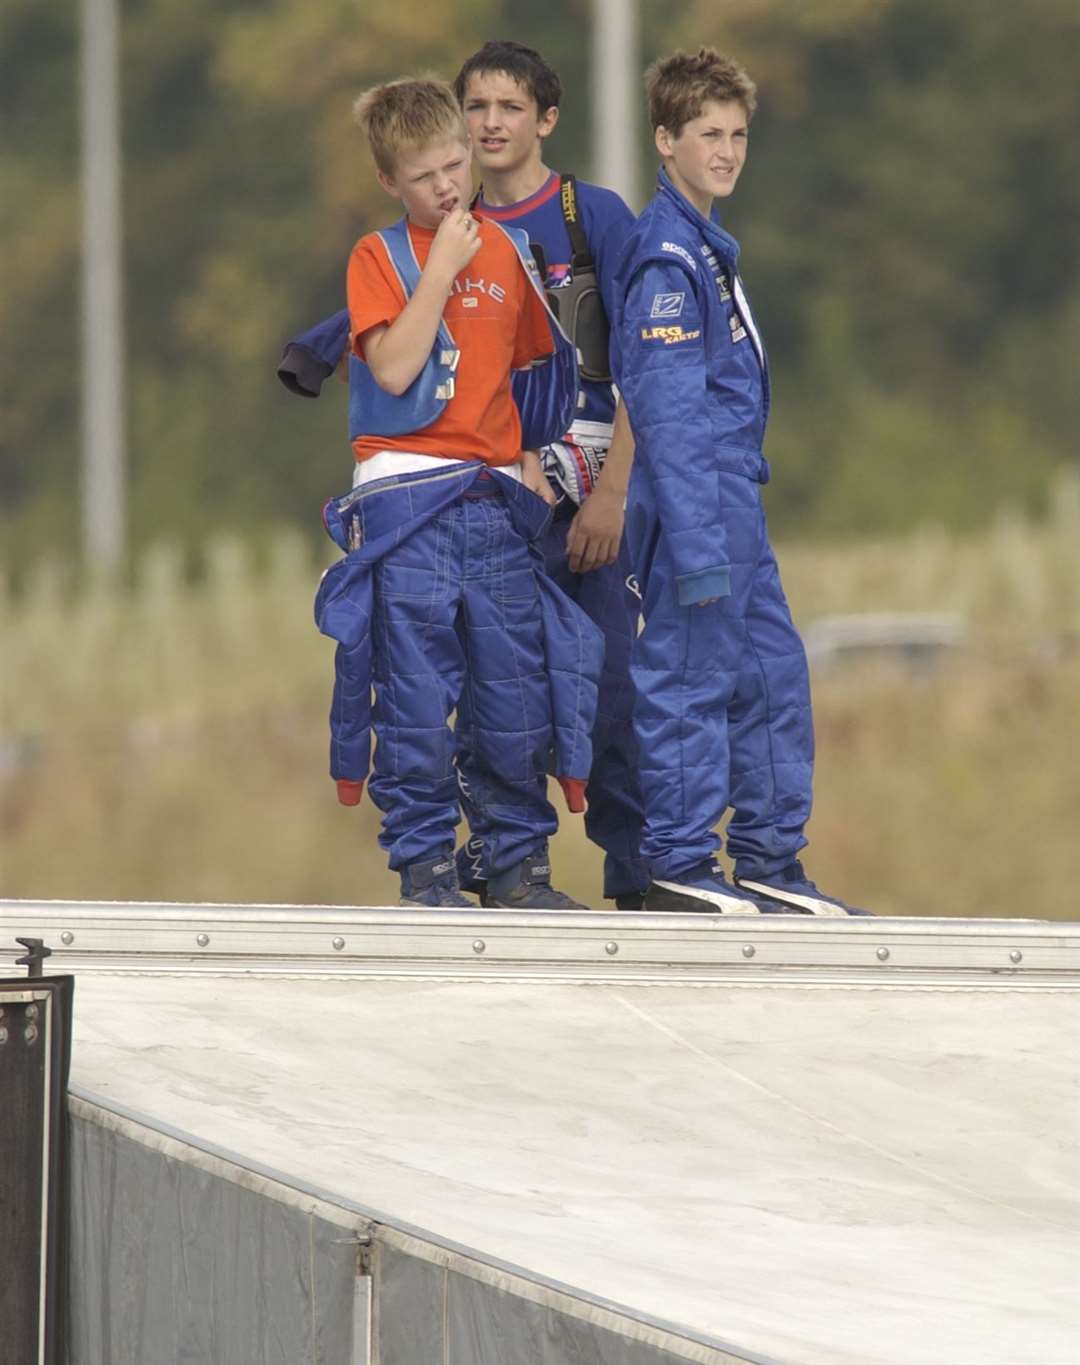 Young racers watch on from the paddock as they wait their turn on the track in September 2003